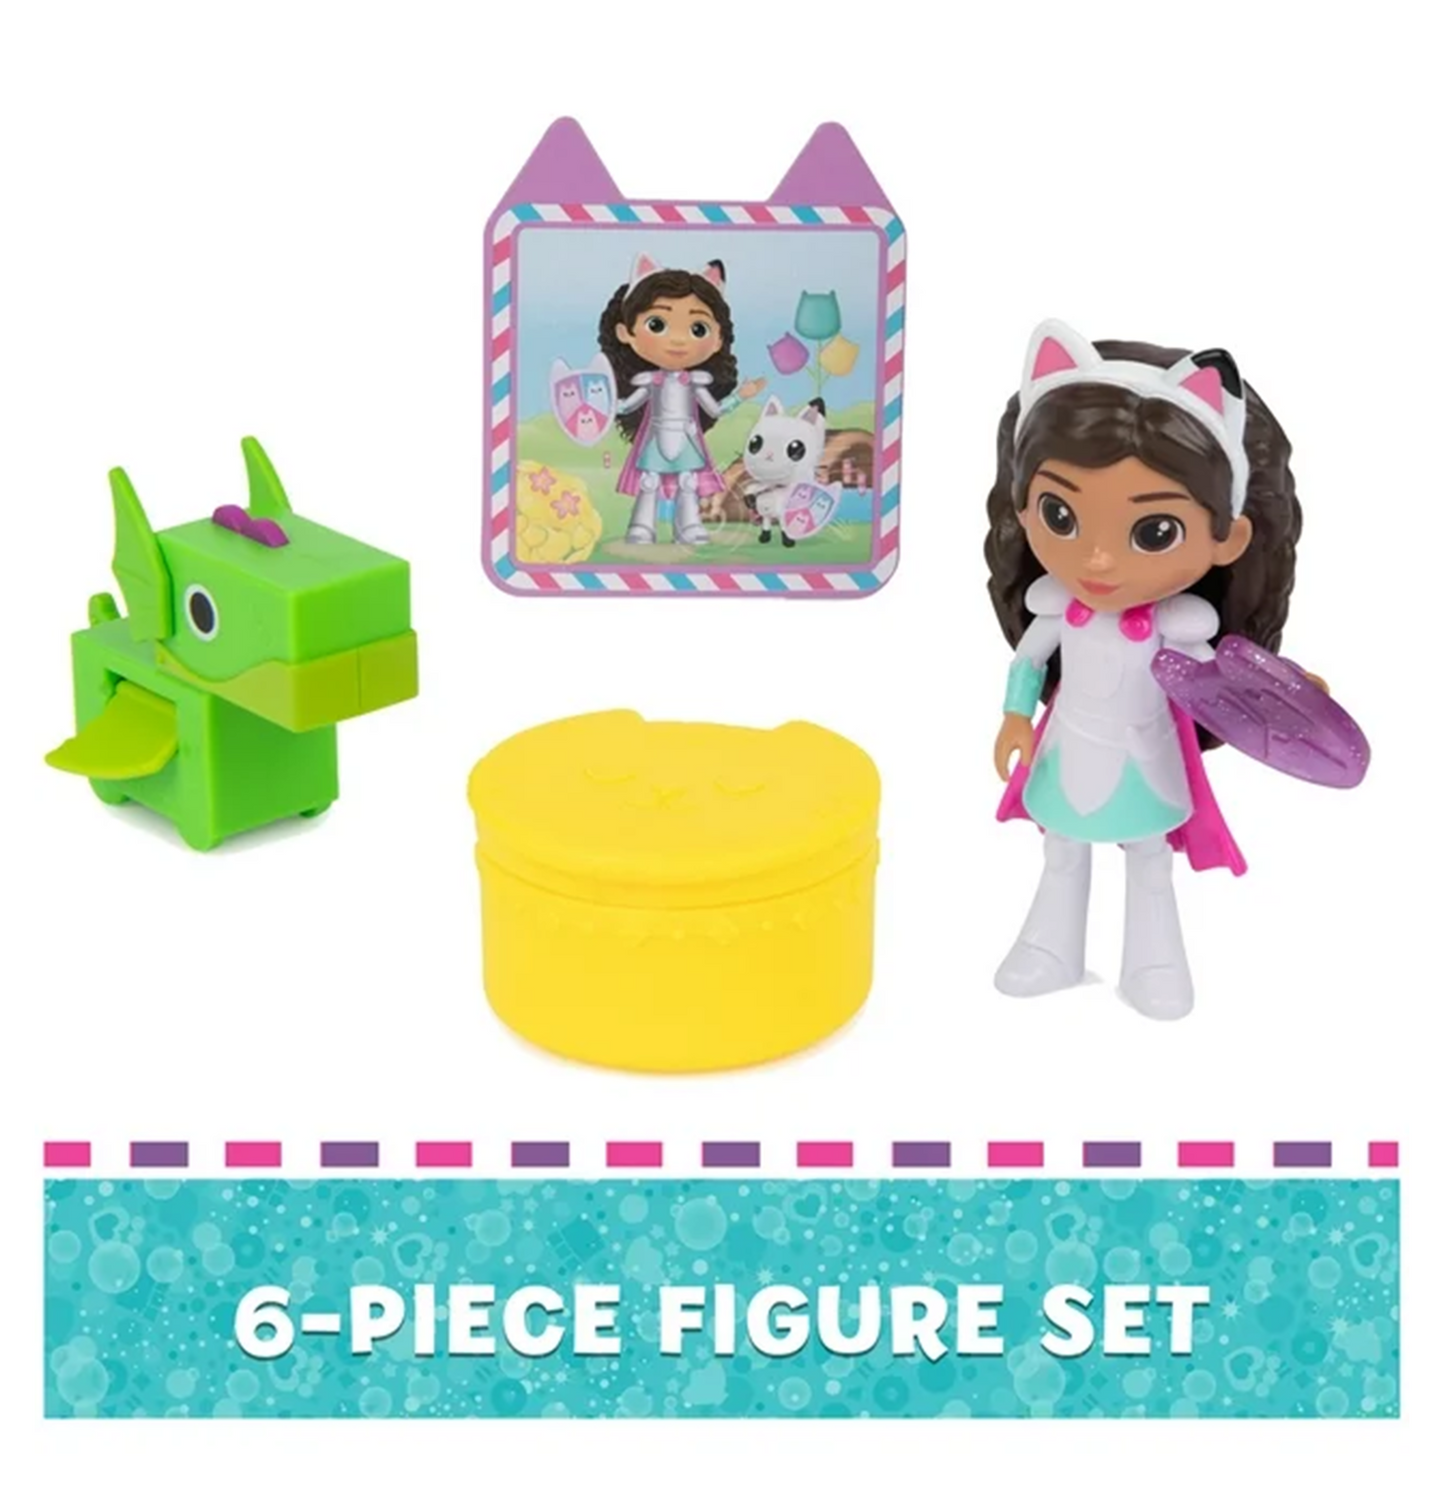 Gabby’s Dollhouse, Gabby the Brave and Dragon 3.4-inch Figure Set